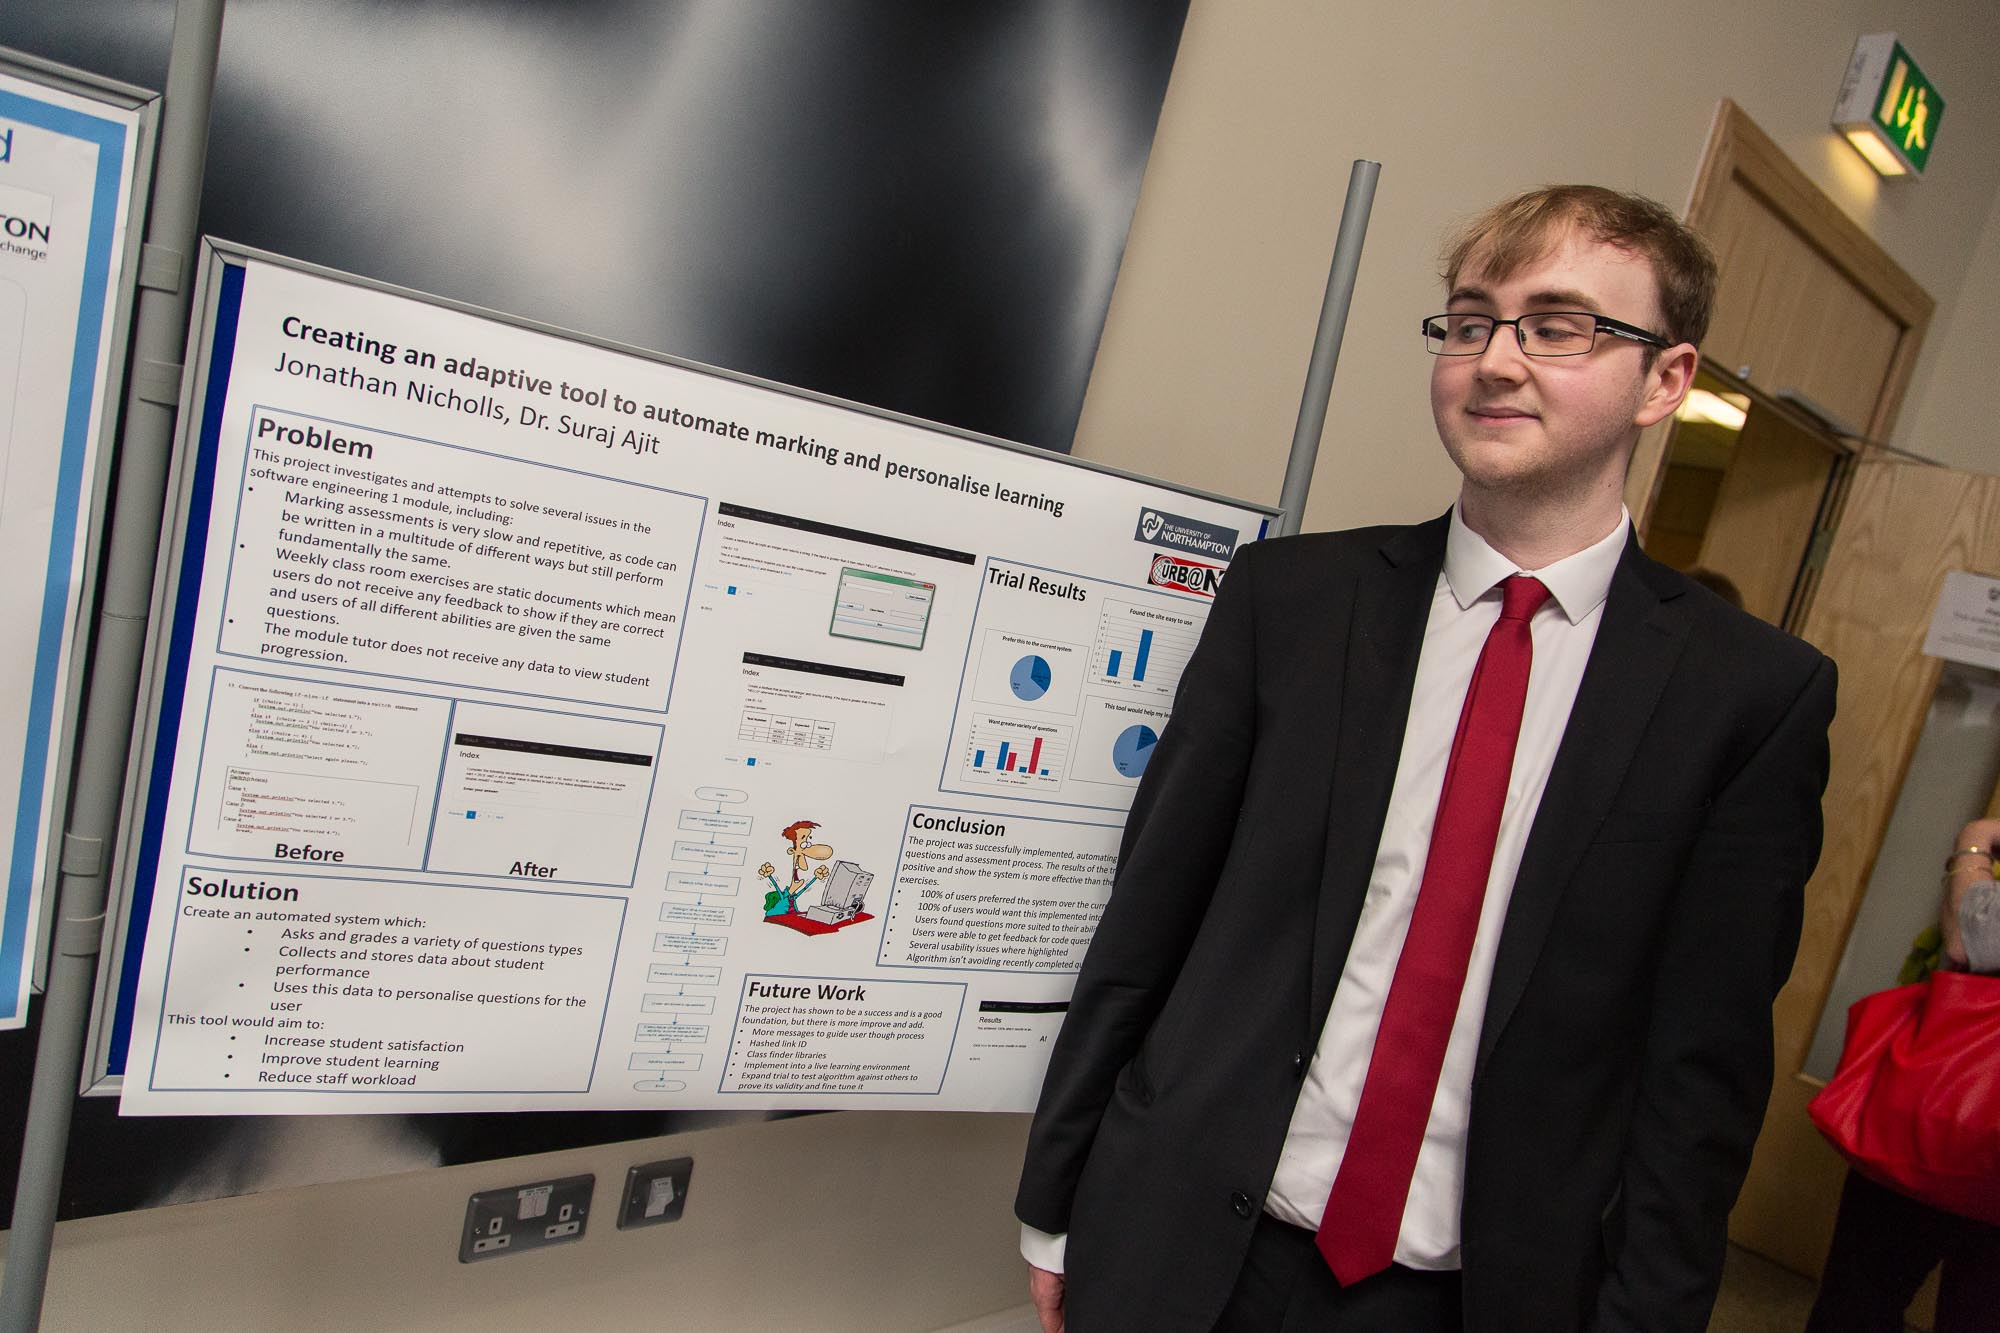 Posters at Learning & Teaching Conference 2015